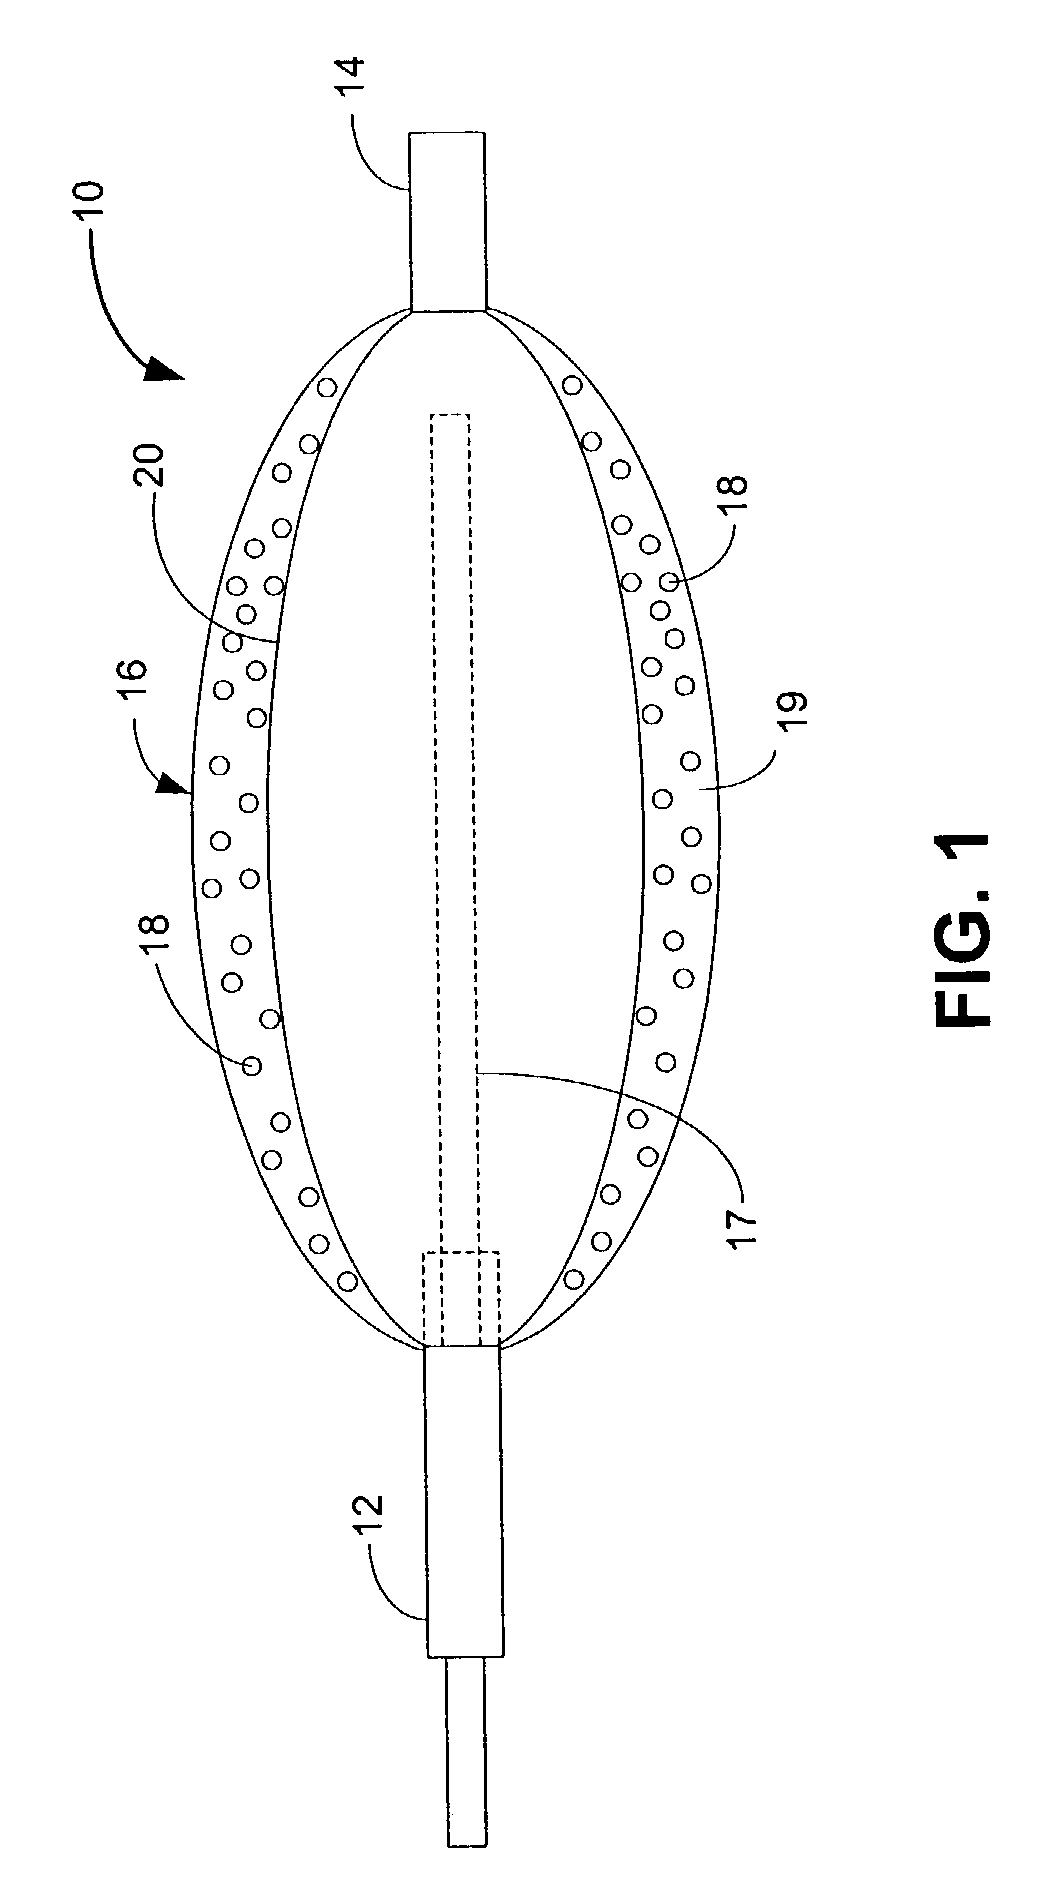 Drug eluting medical device with an expandable portion for drug release